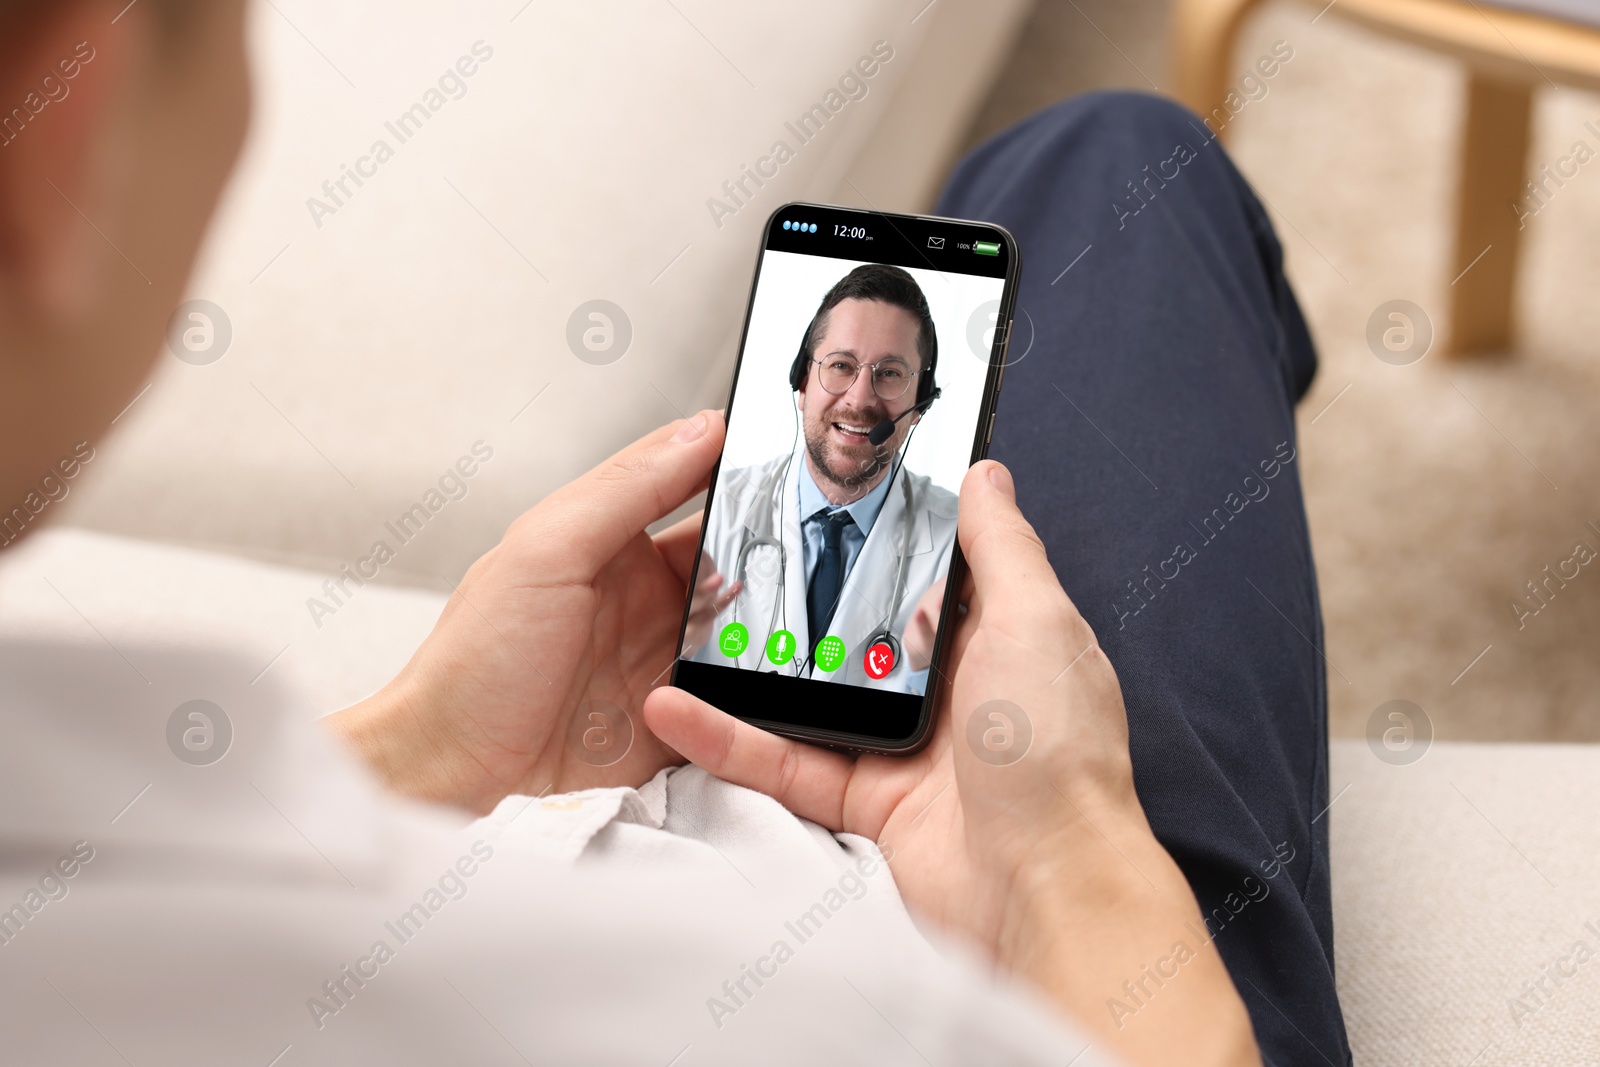 Image of Online medical consultation. Man having video chat with doctor via smartphone at home, closeup